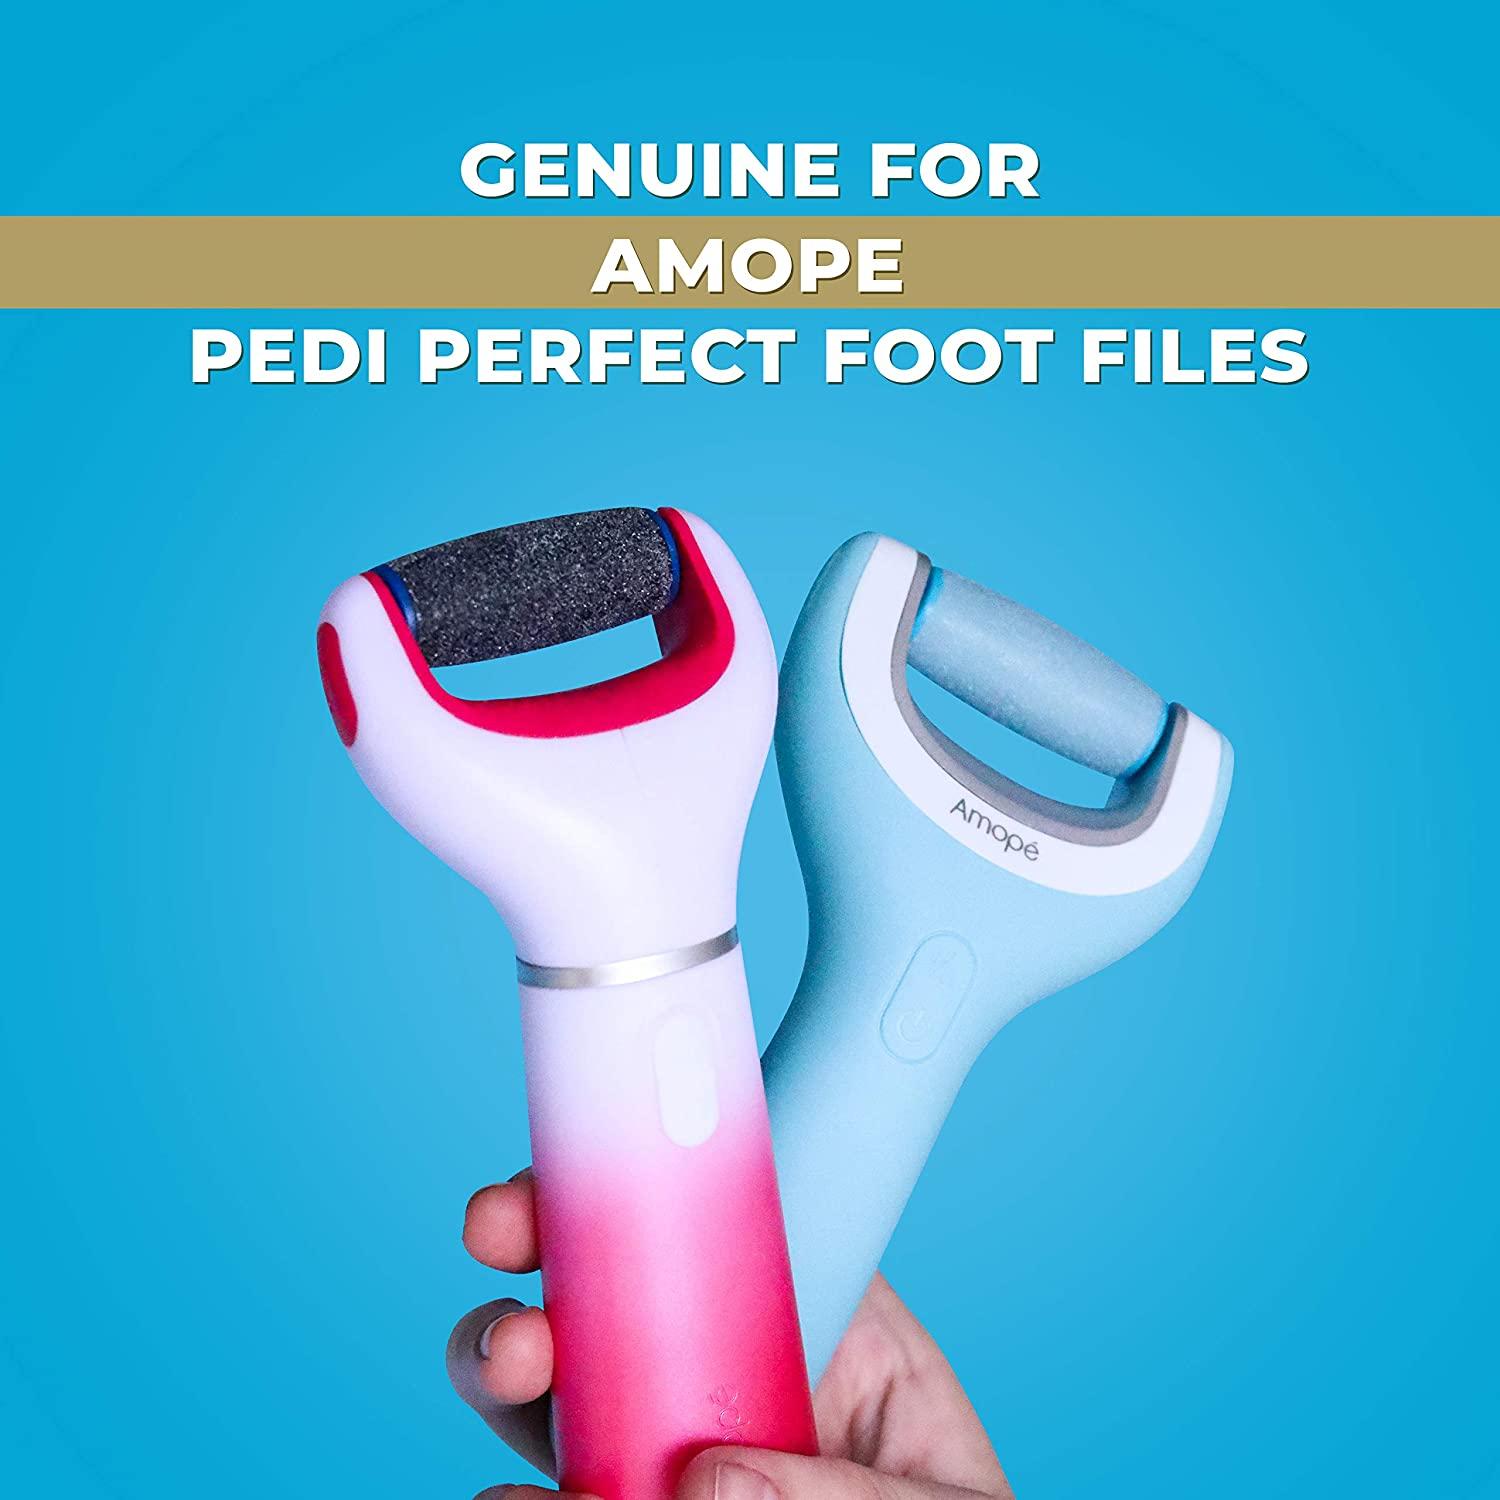 Amope Pedi Perfect Electronic Foot File Refills, Extra Coarse Rollers for  Feet, Removes Hard and Dead Skin - 2 Count